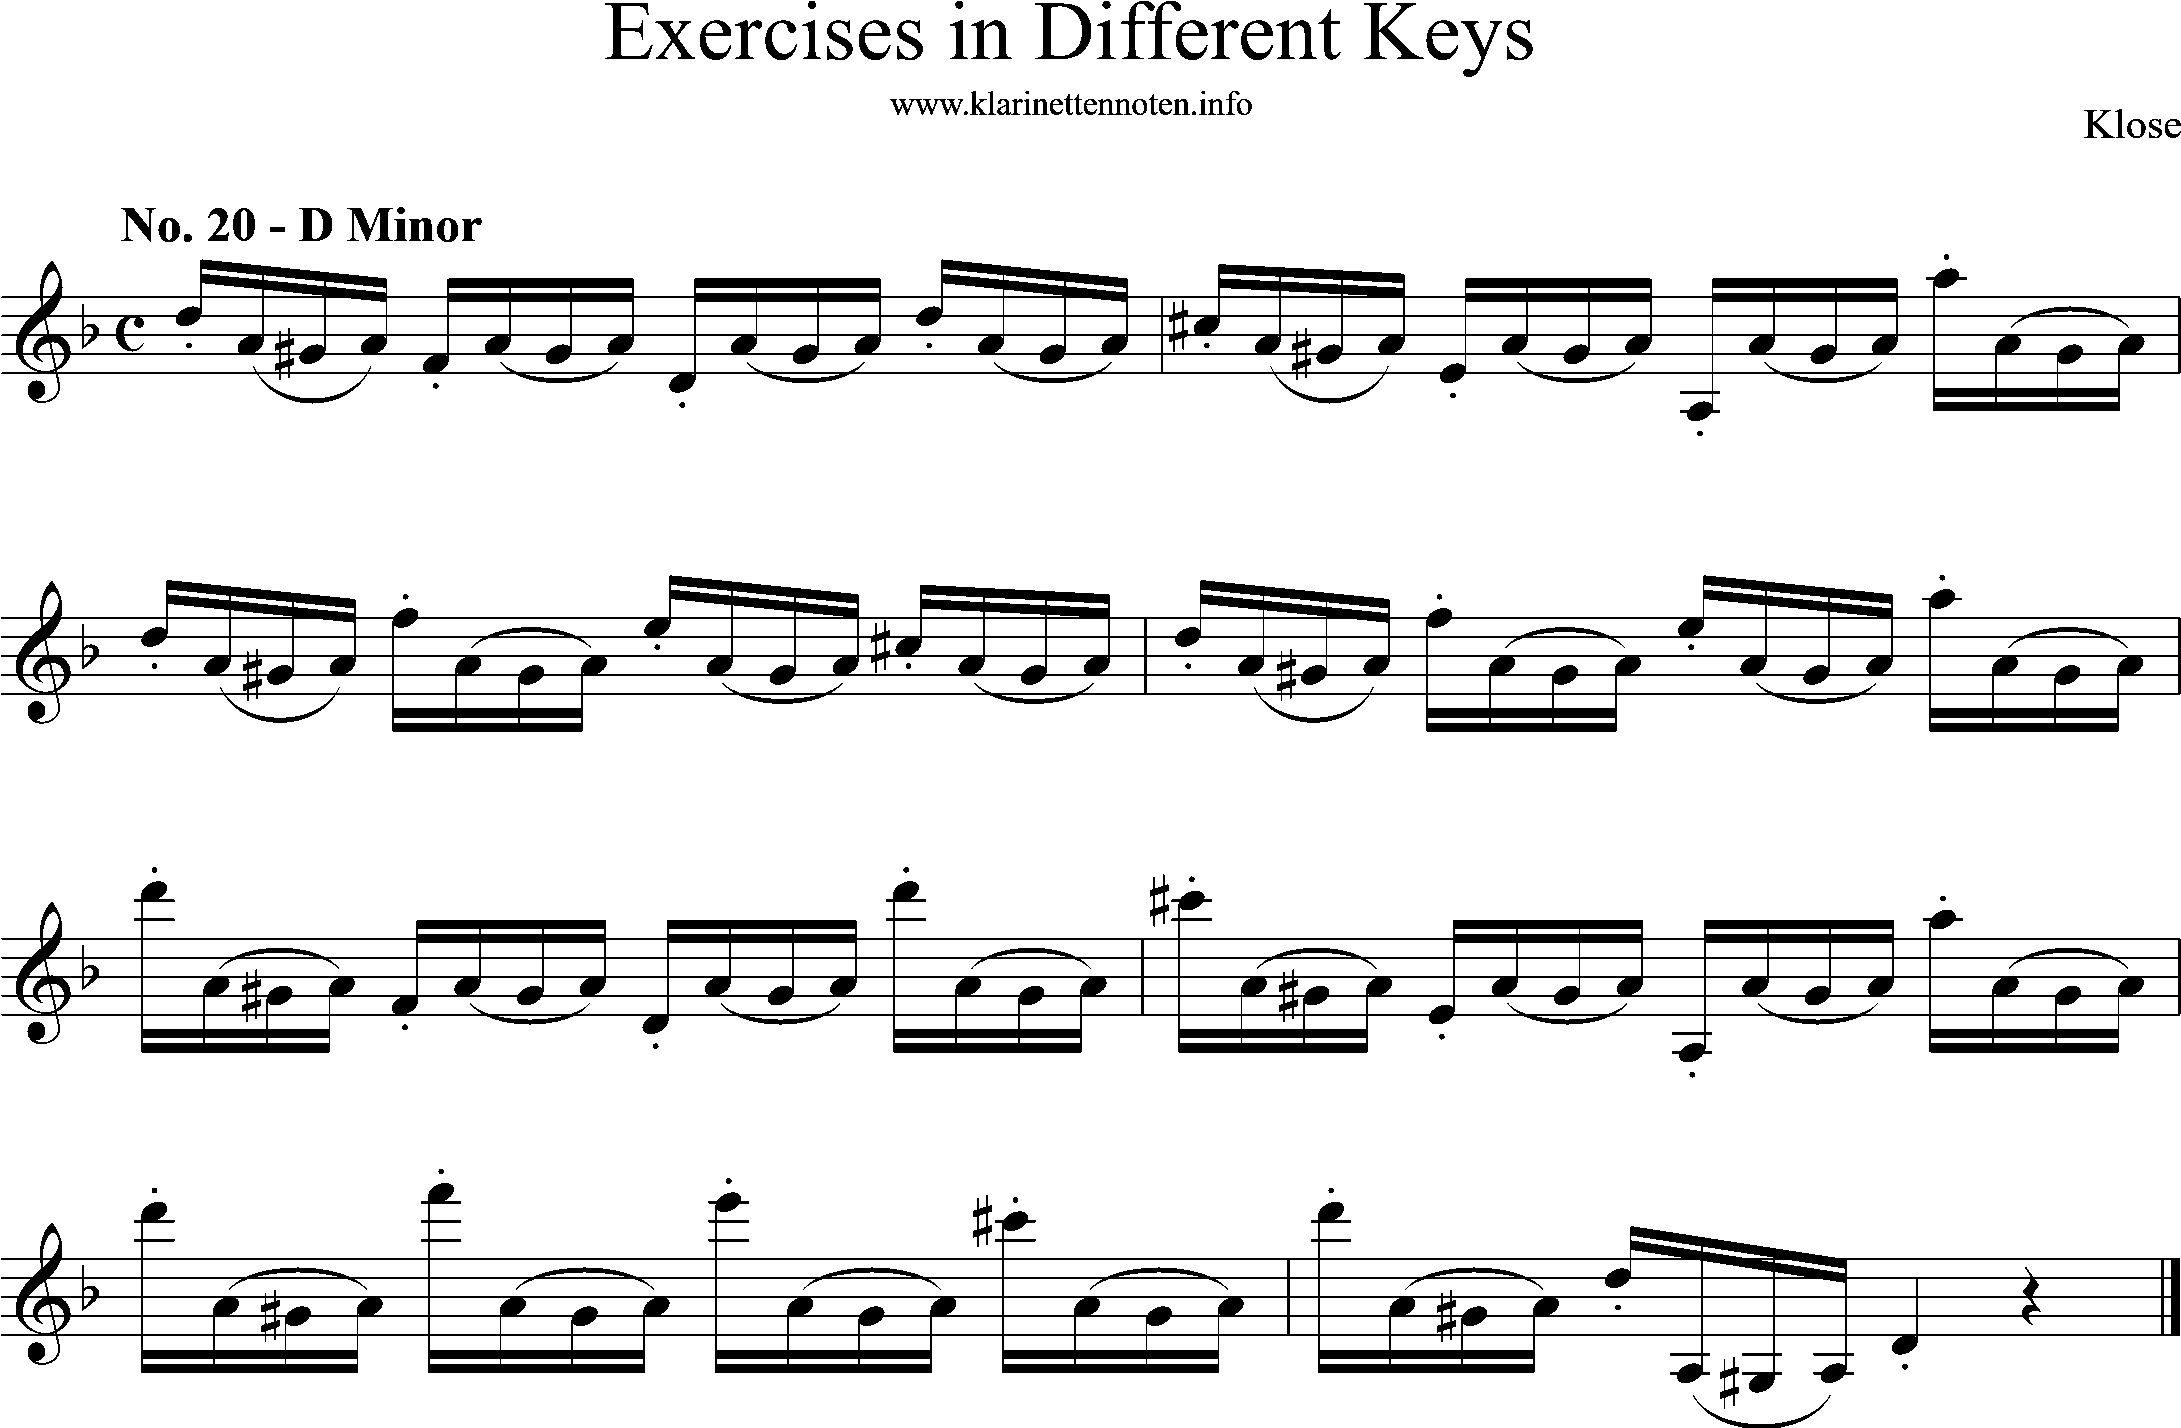 Exercises in Differewnt Keys, klose, No-20, D-Minor